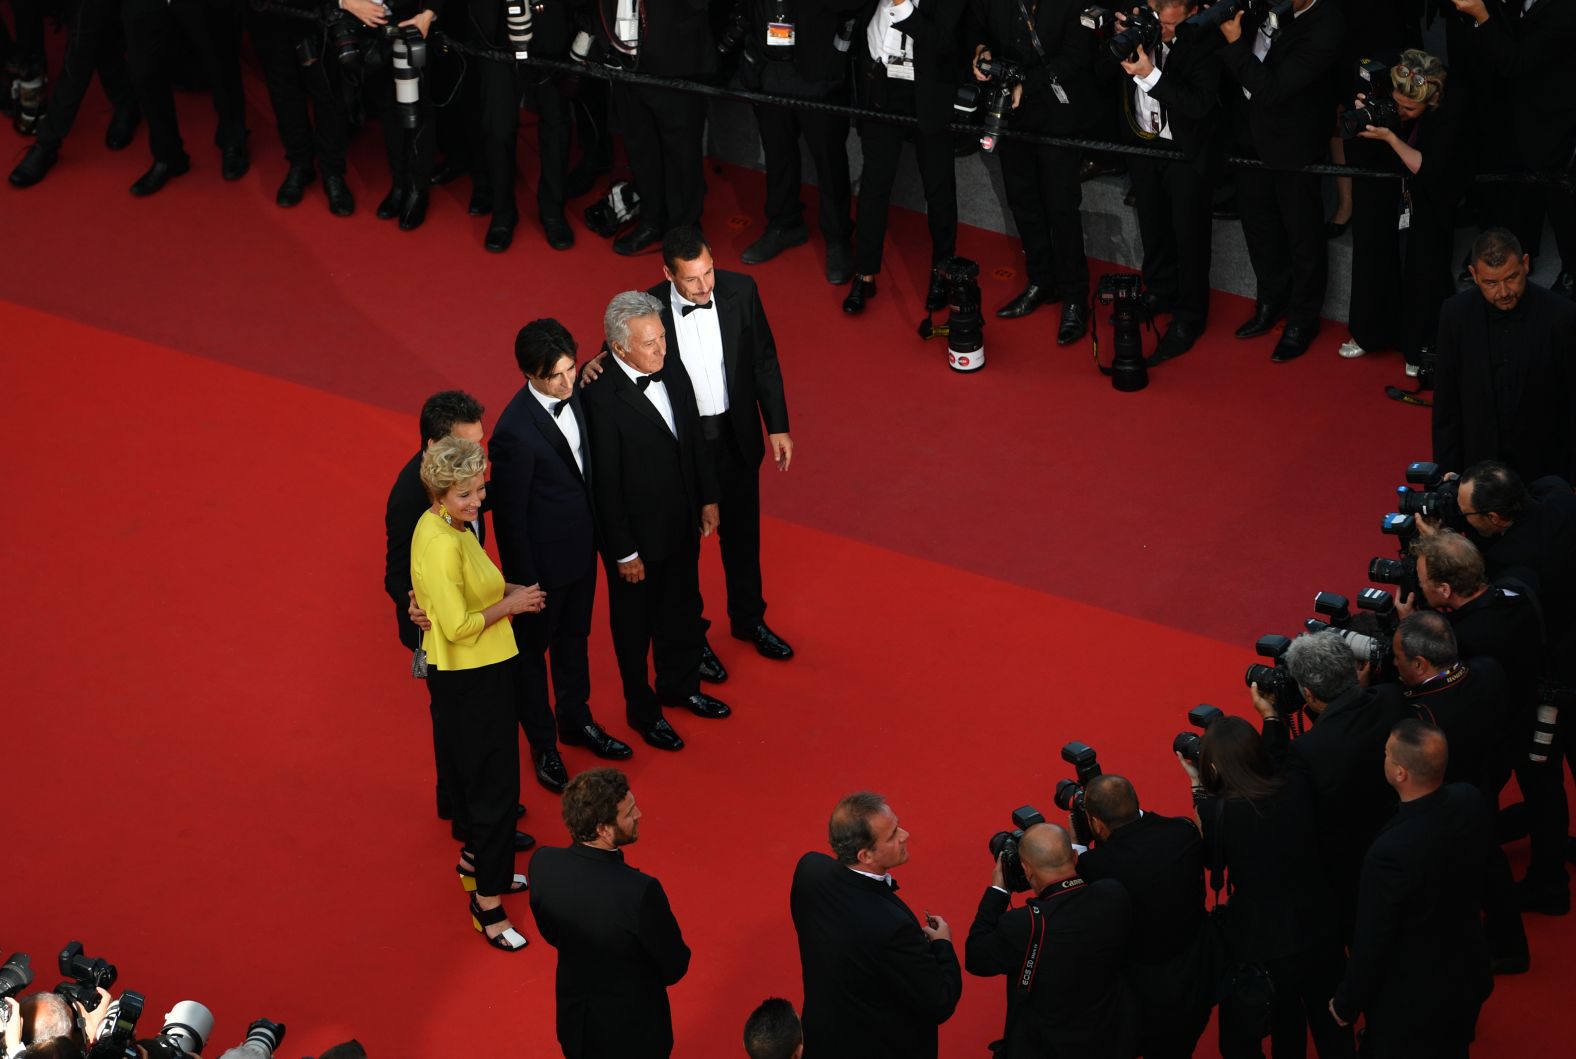 Sandler is joined by Emma Thompson, Ben Stiller, director Noah Baumbach and Dustin Hoffman as they arrive for a screening of "The Meyerowitz Stories (New and Selected)" at the Cannes Film Festival in 2017.